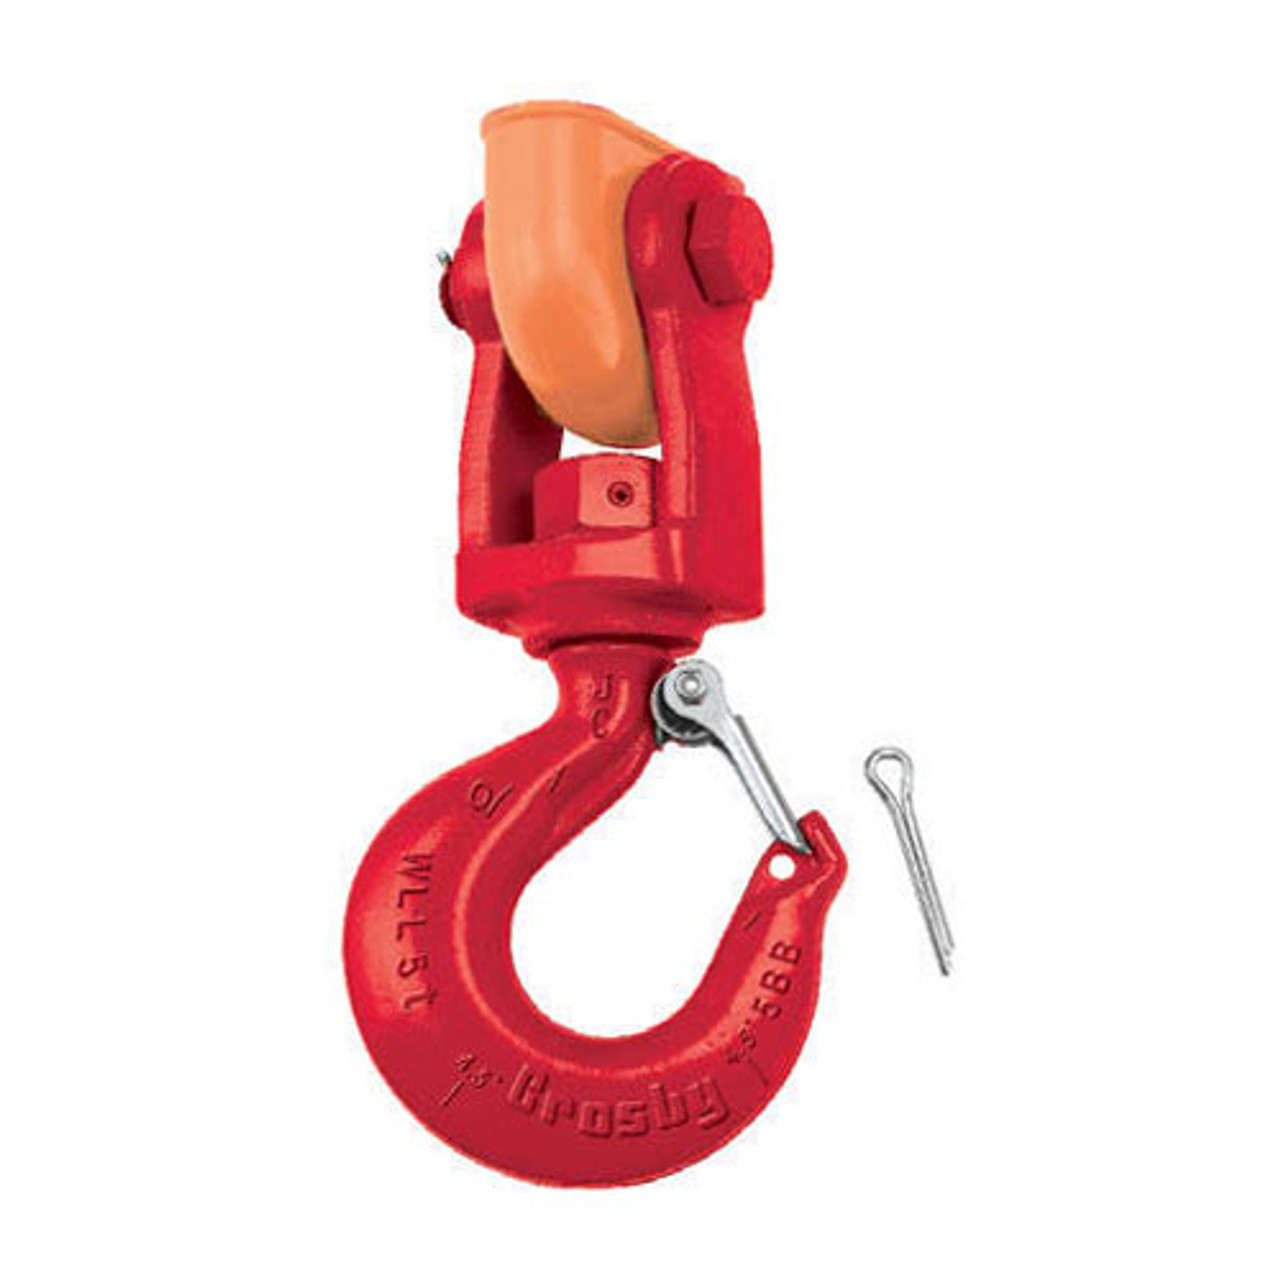 Crosby O-319 Chain Nest Hooks (Universal Chain Hoist Replacement Hook)